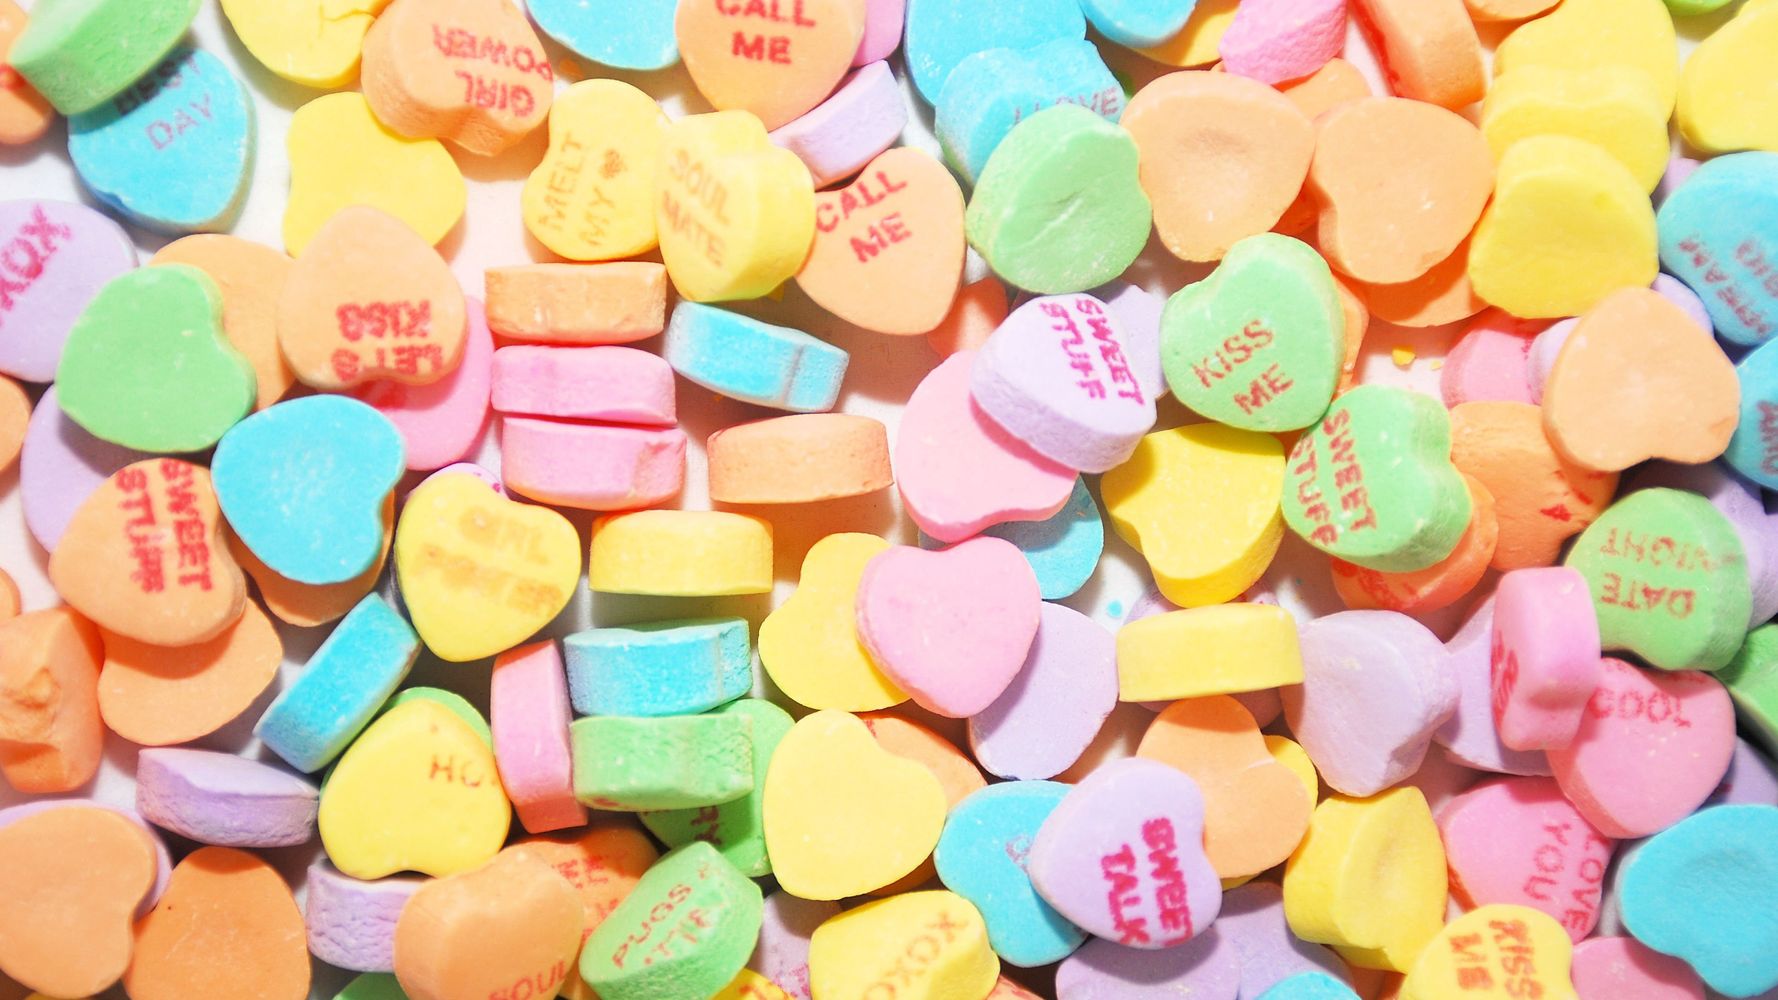 Large Conversation Hearts: Sweet Sentiments in a Big Way